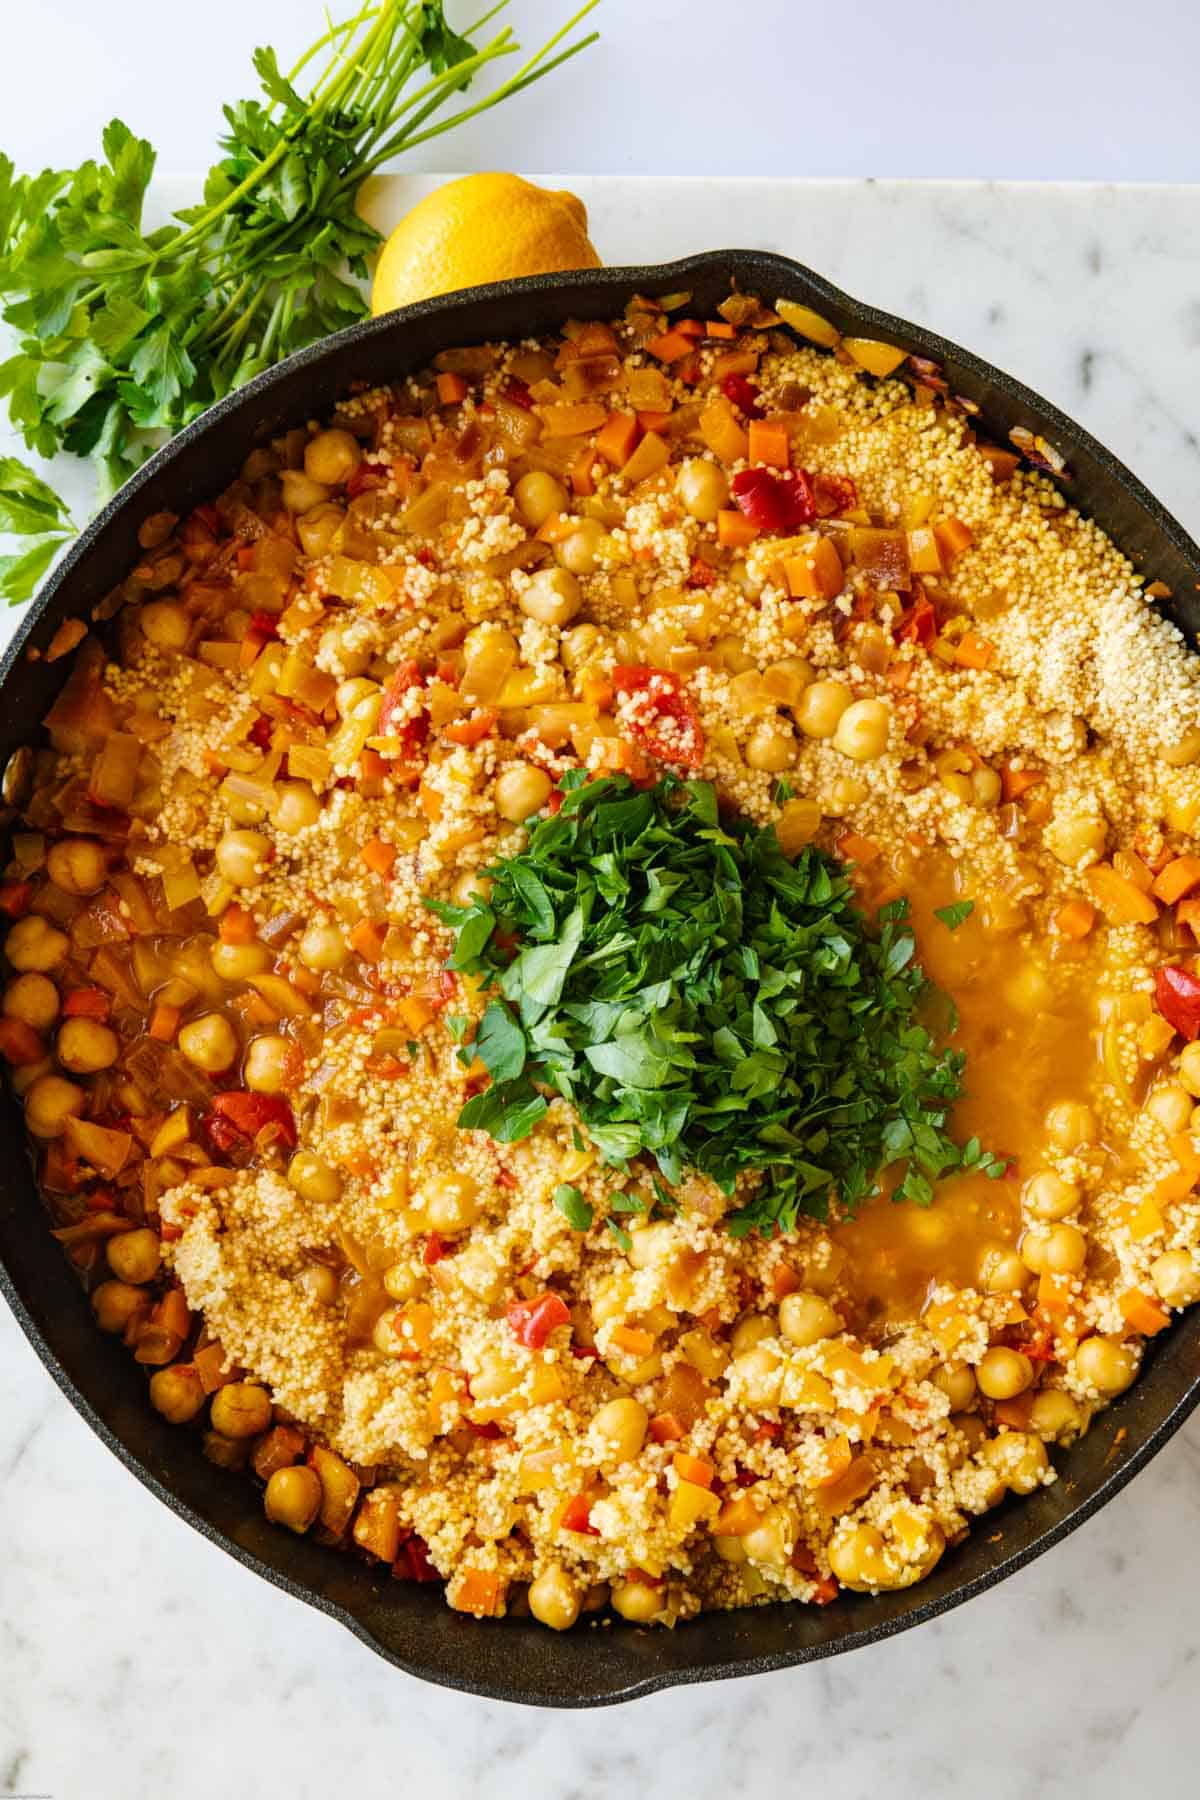 Spiced Moroccan couscous and chickpeas with chopped bell peppers, carrots, red onion, Peppadew piquante peppers, veggie broth, and parsley in a cast iron skillet.